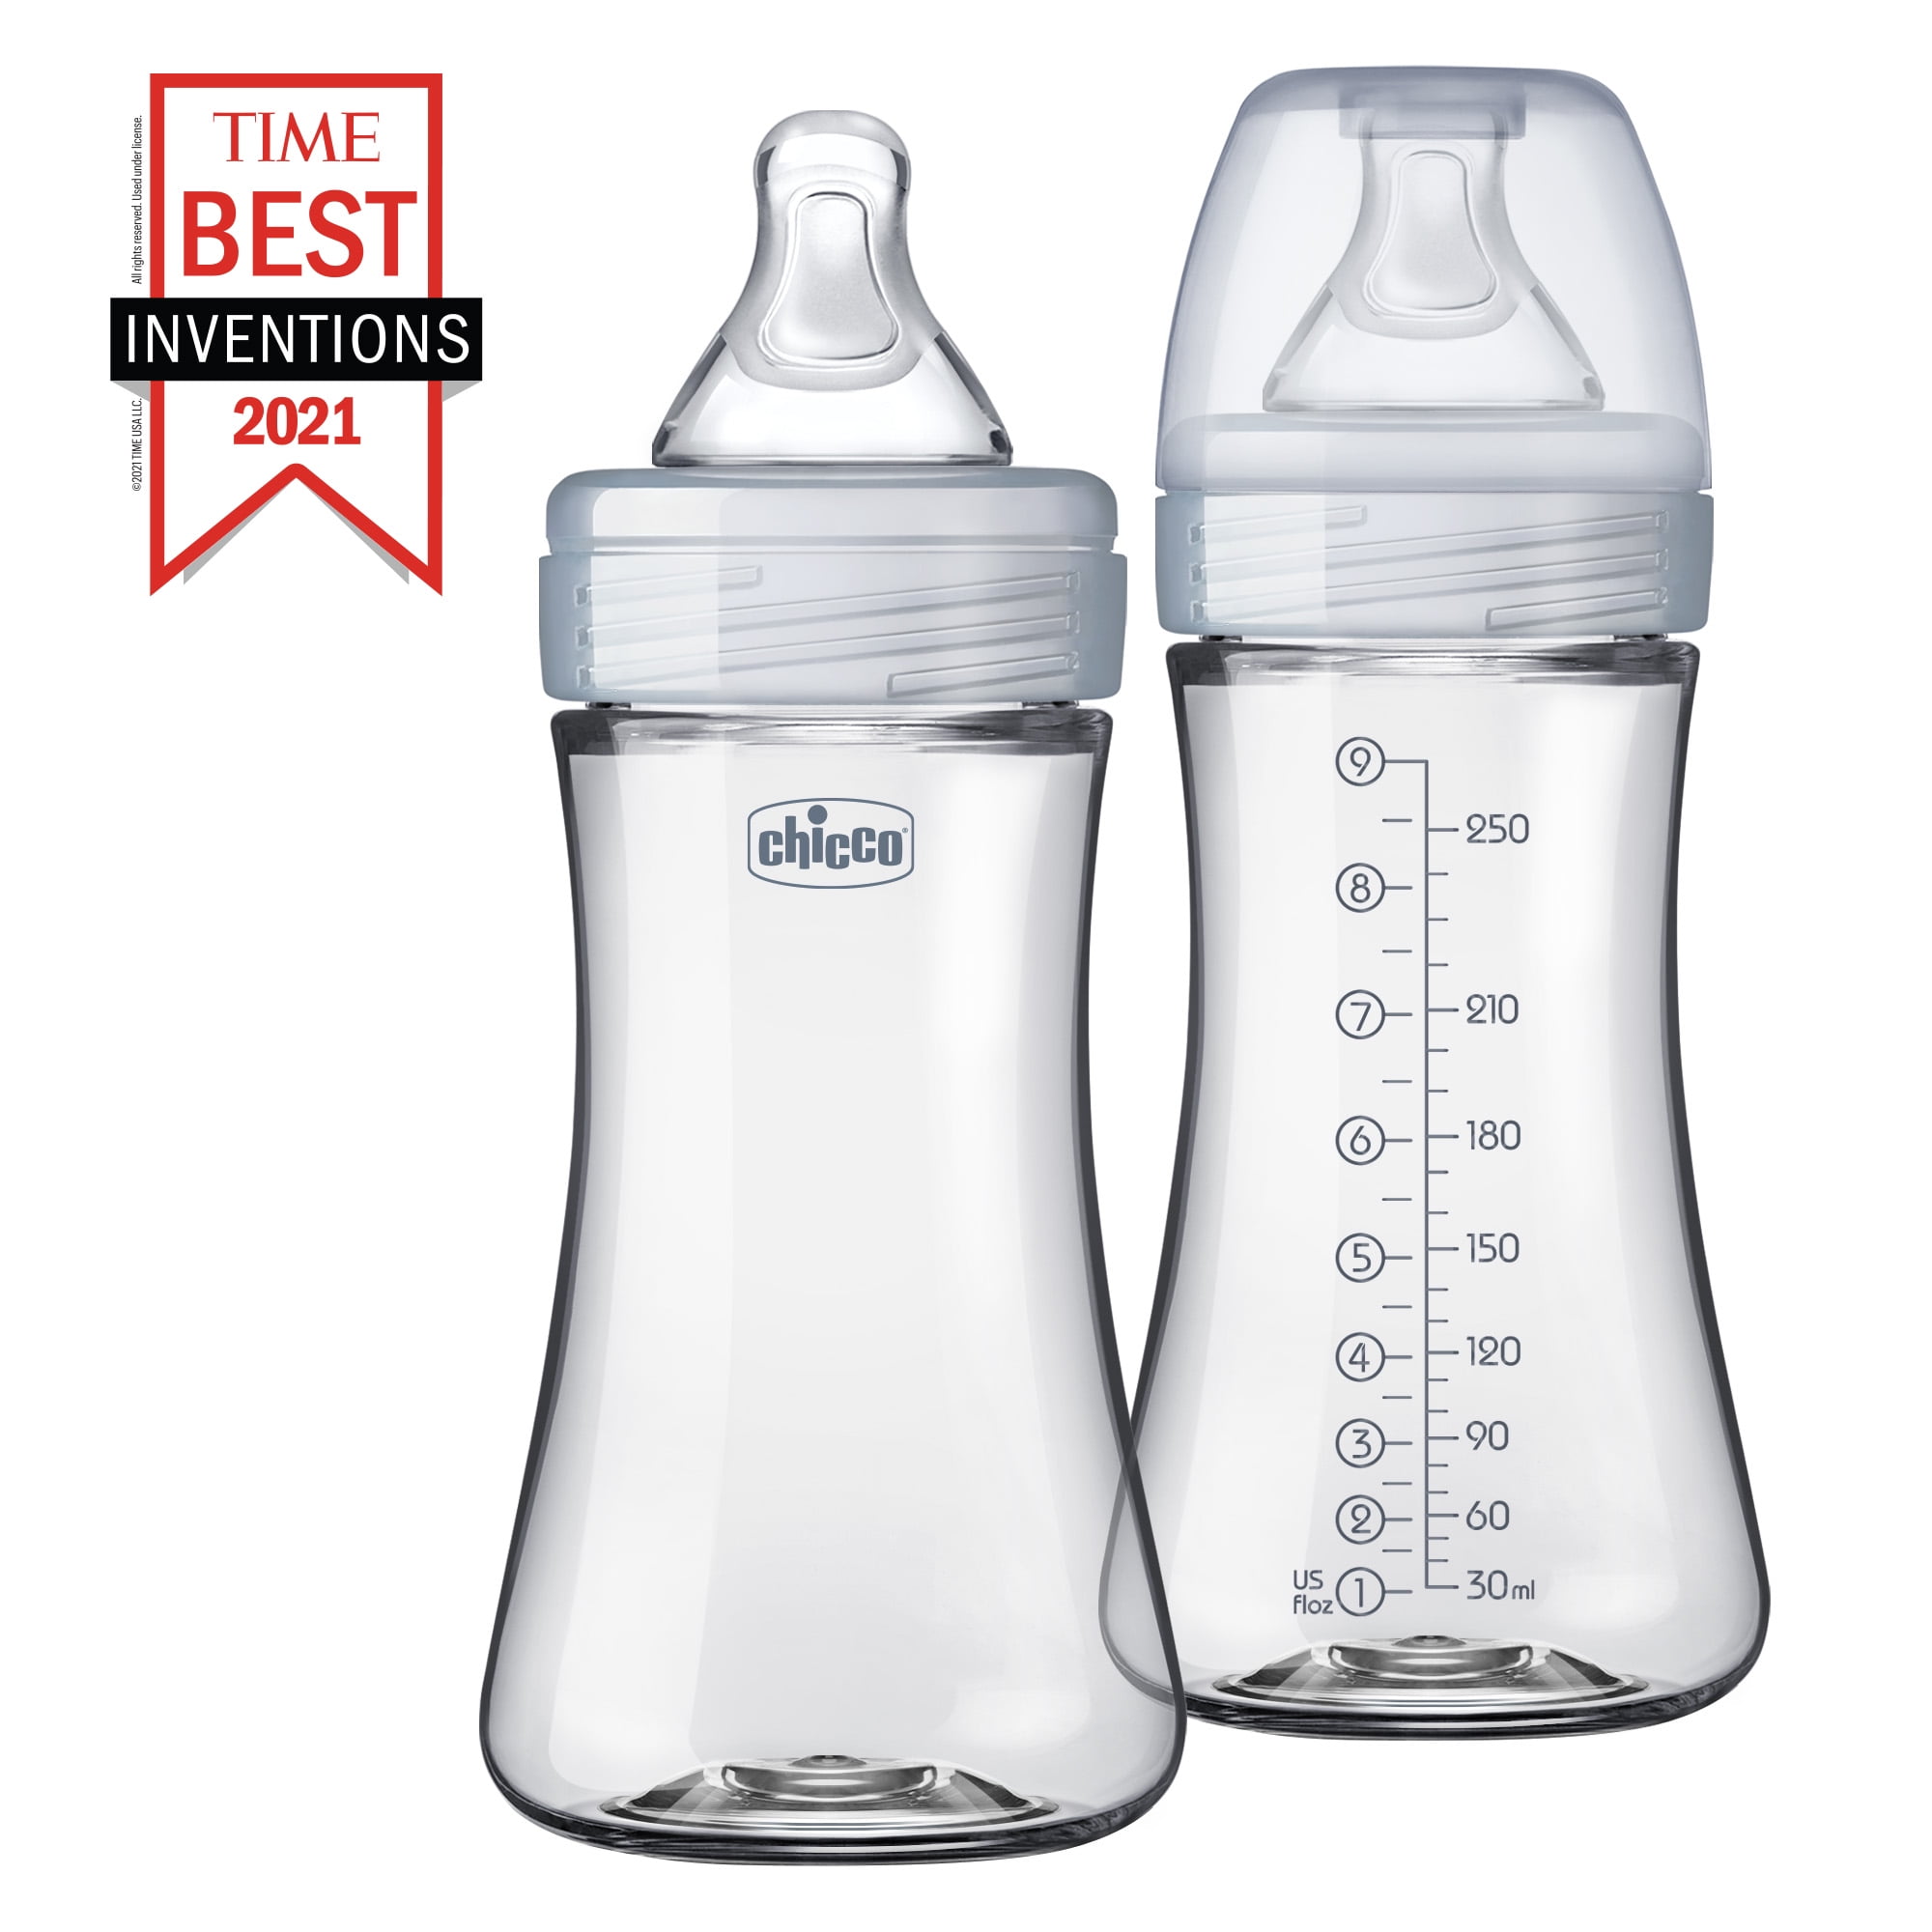 Chicco Chicco Wellbeing 250 ml Feeding Bottle Advanced Anti-Colic System Green count 1 